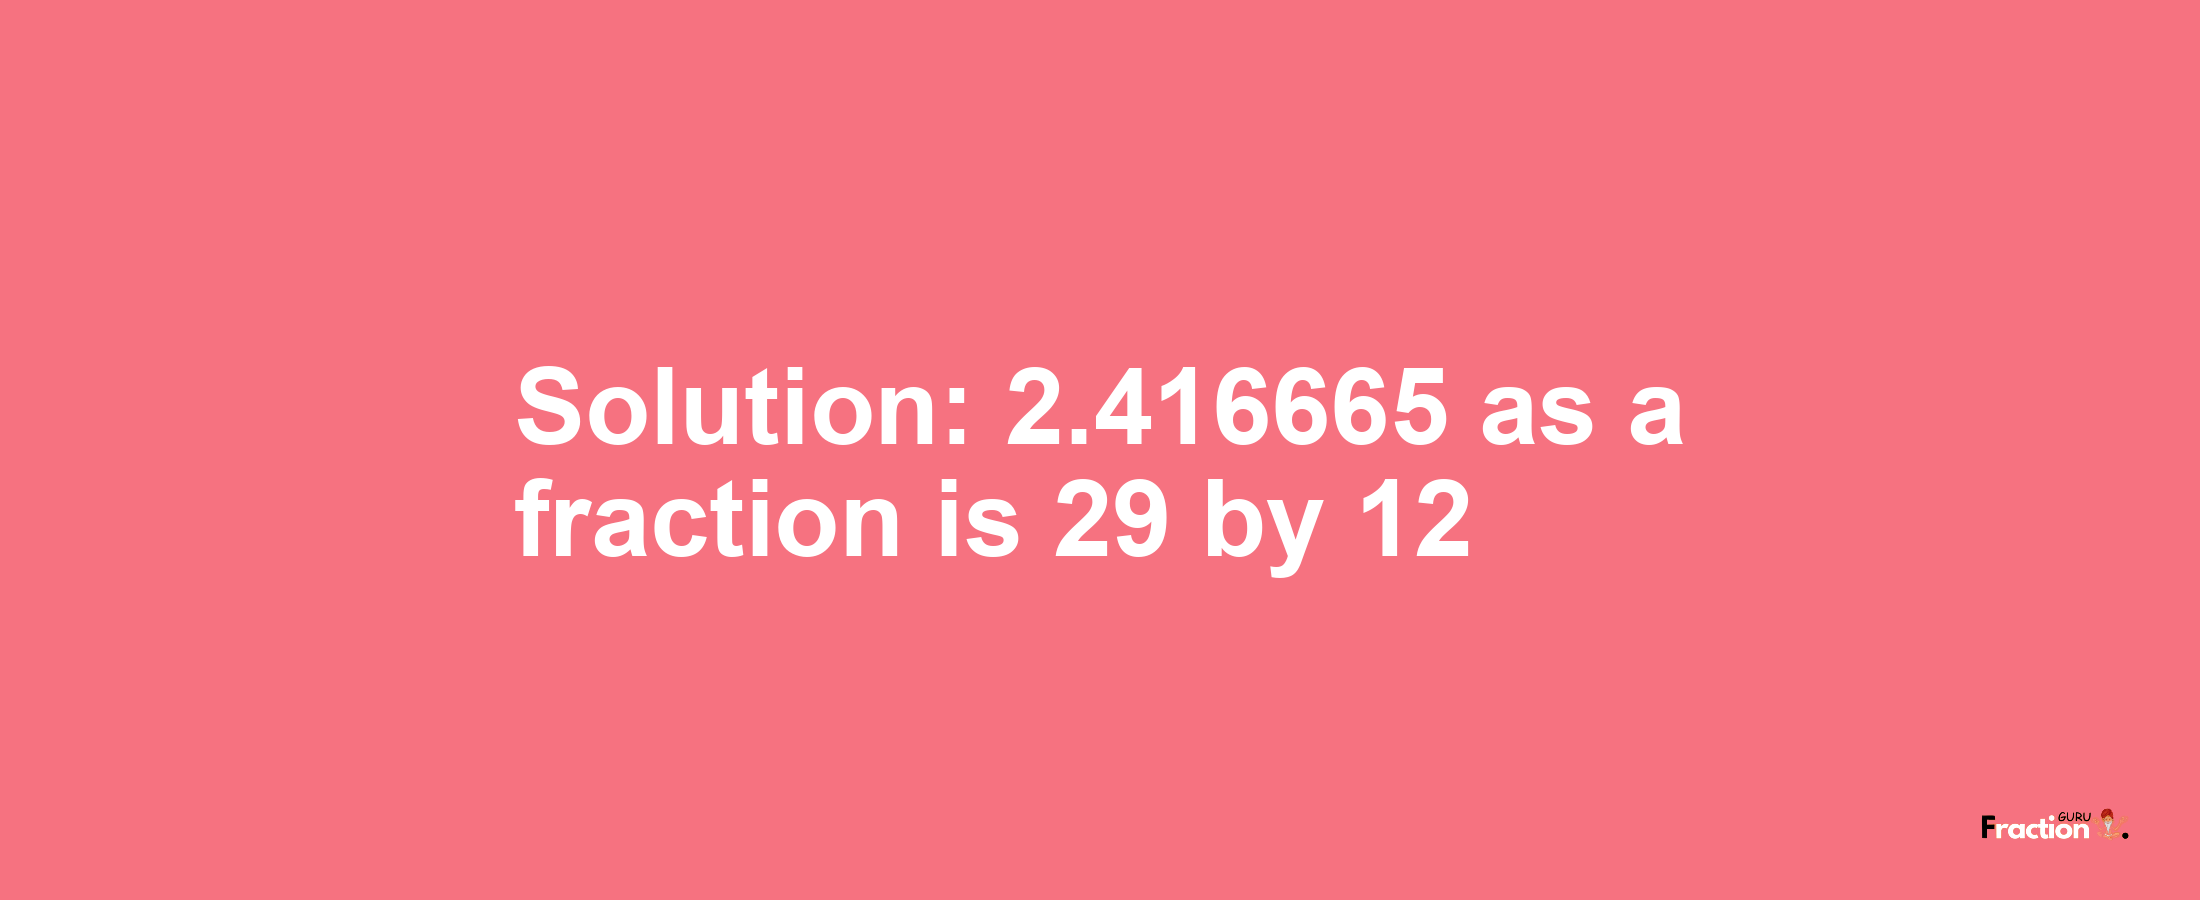 Solution:2.416665 as a fraction is 29/12